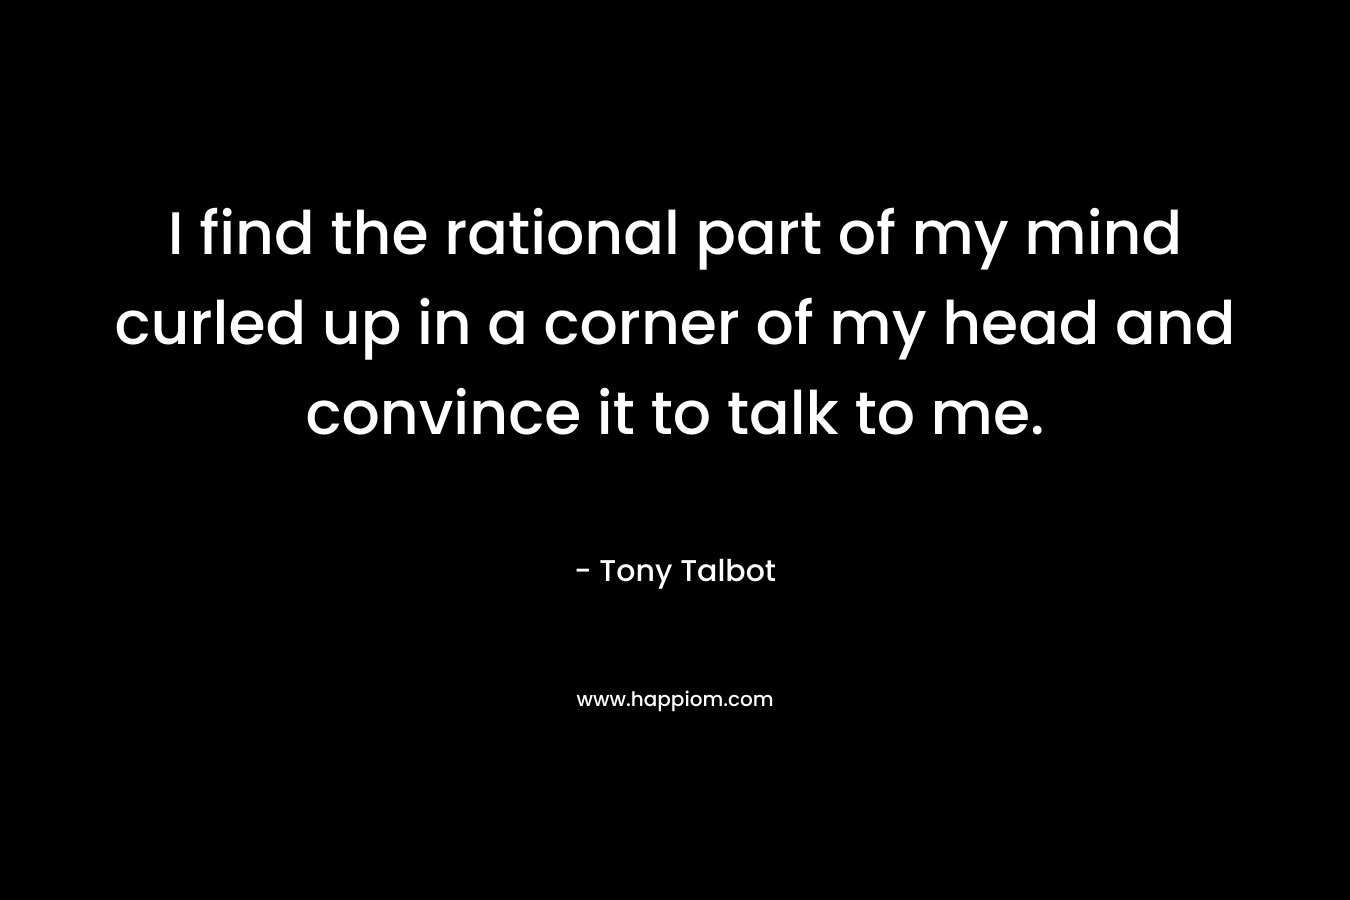 I find the rational part of my mind curled up in a corner of my head and convince it to talk to me. – Tony Talbot